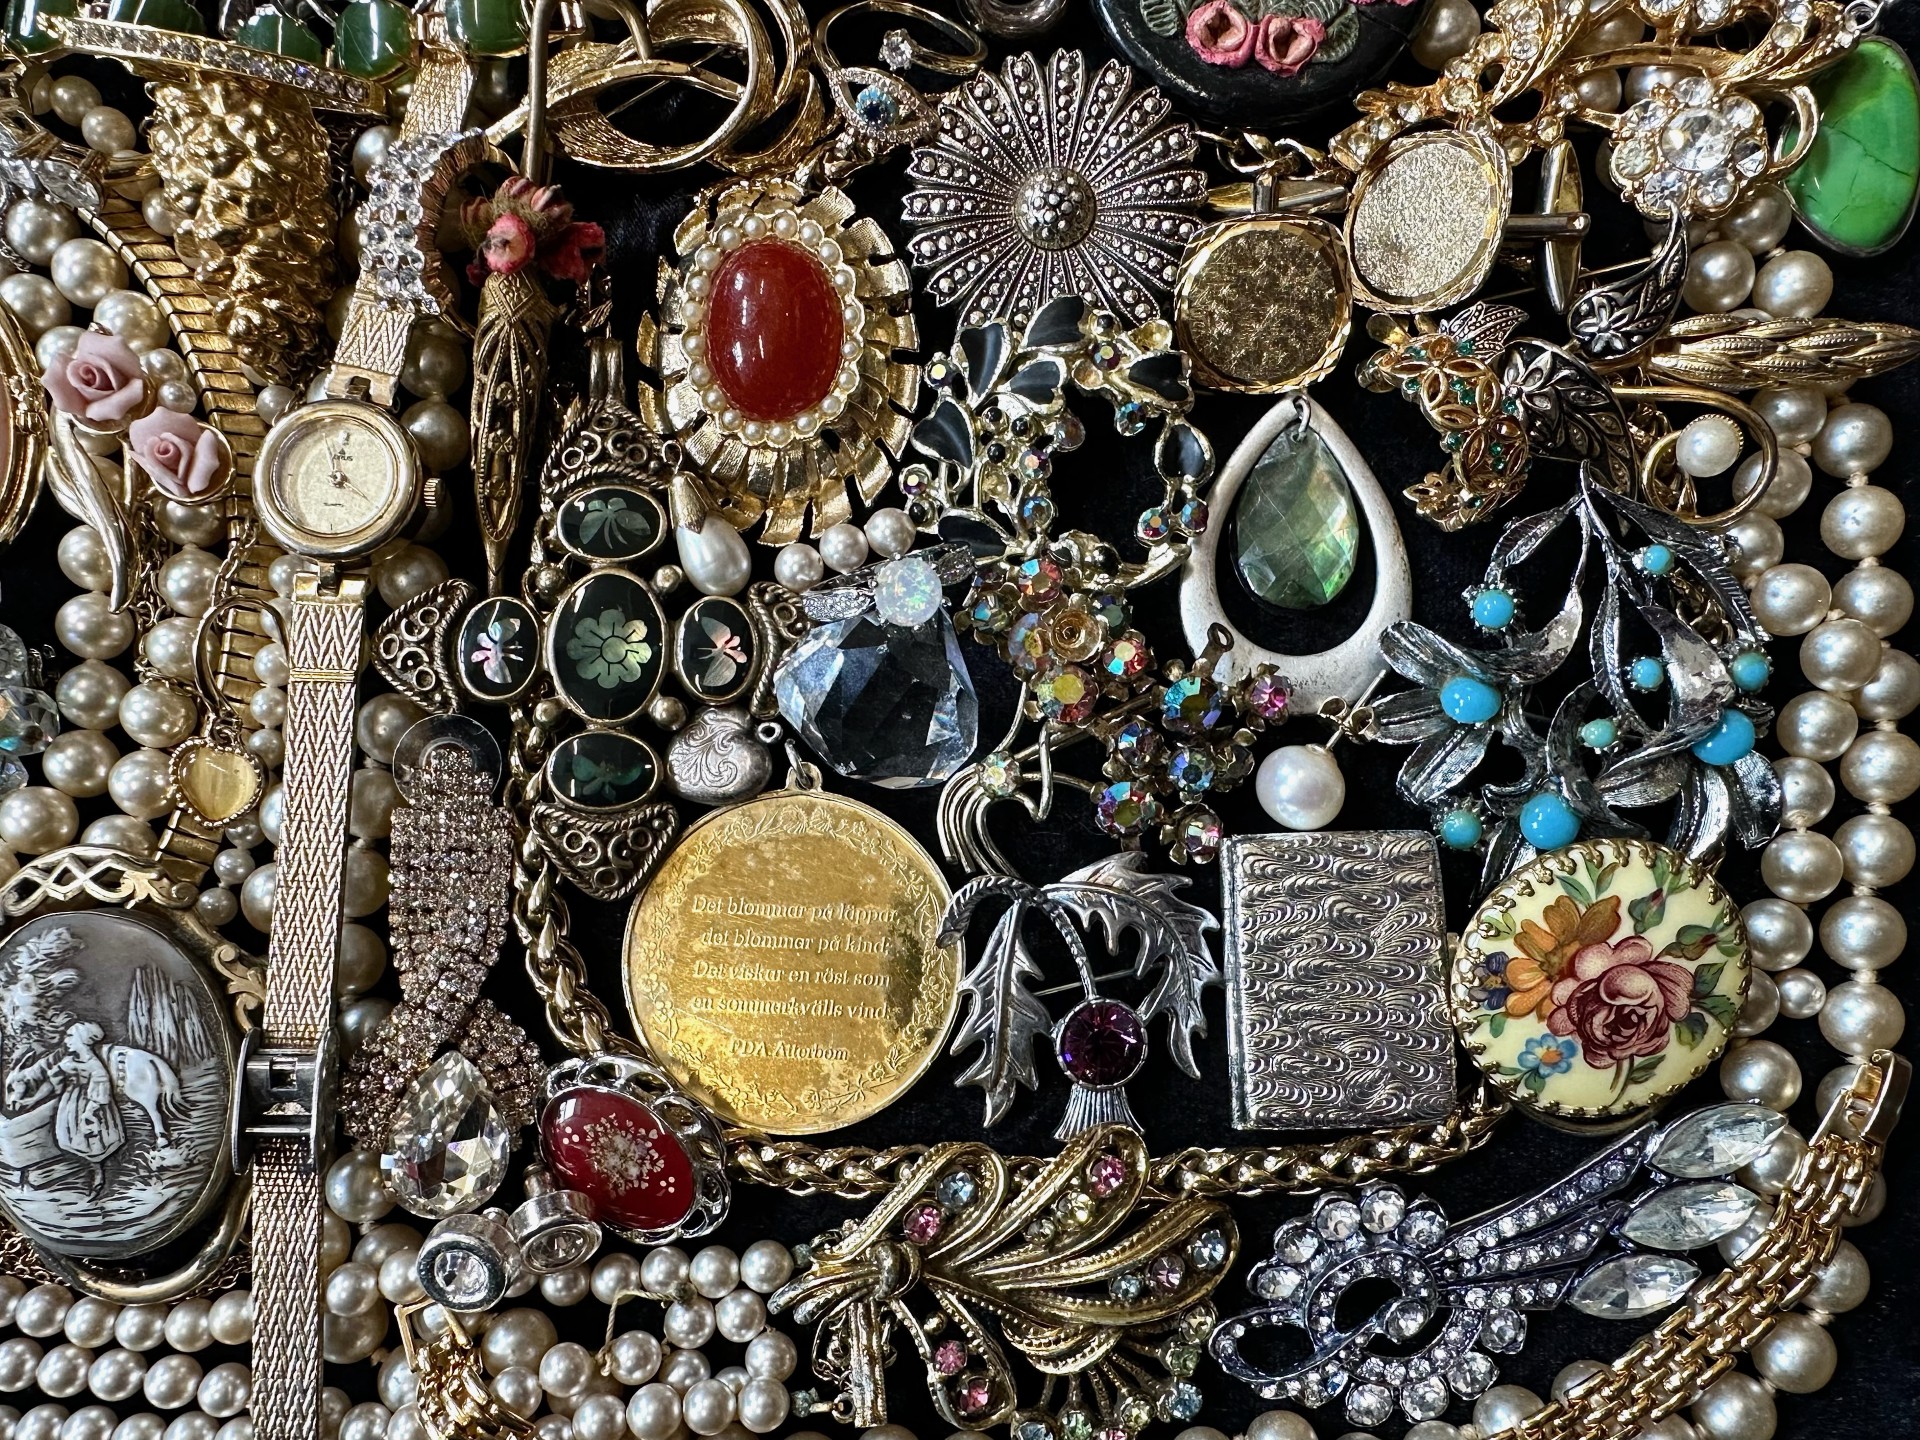 Collection of Quality Costume Jewellery, including pearls, necklaces, chains, bracelets, pendants, - Image 3 of 4